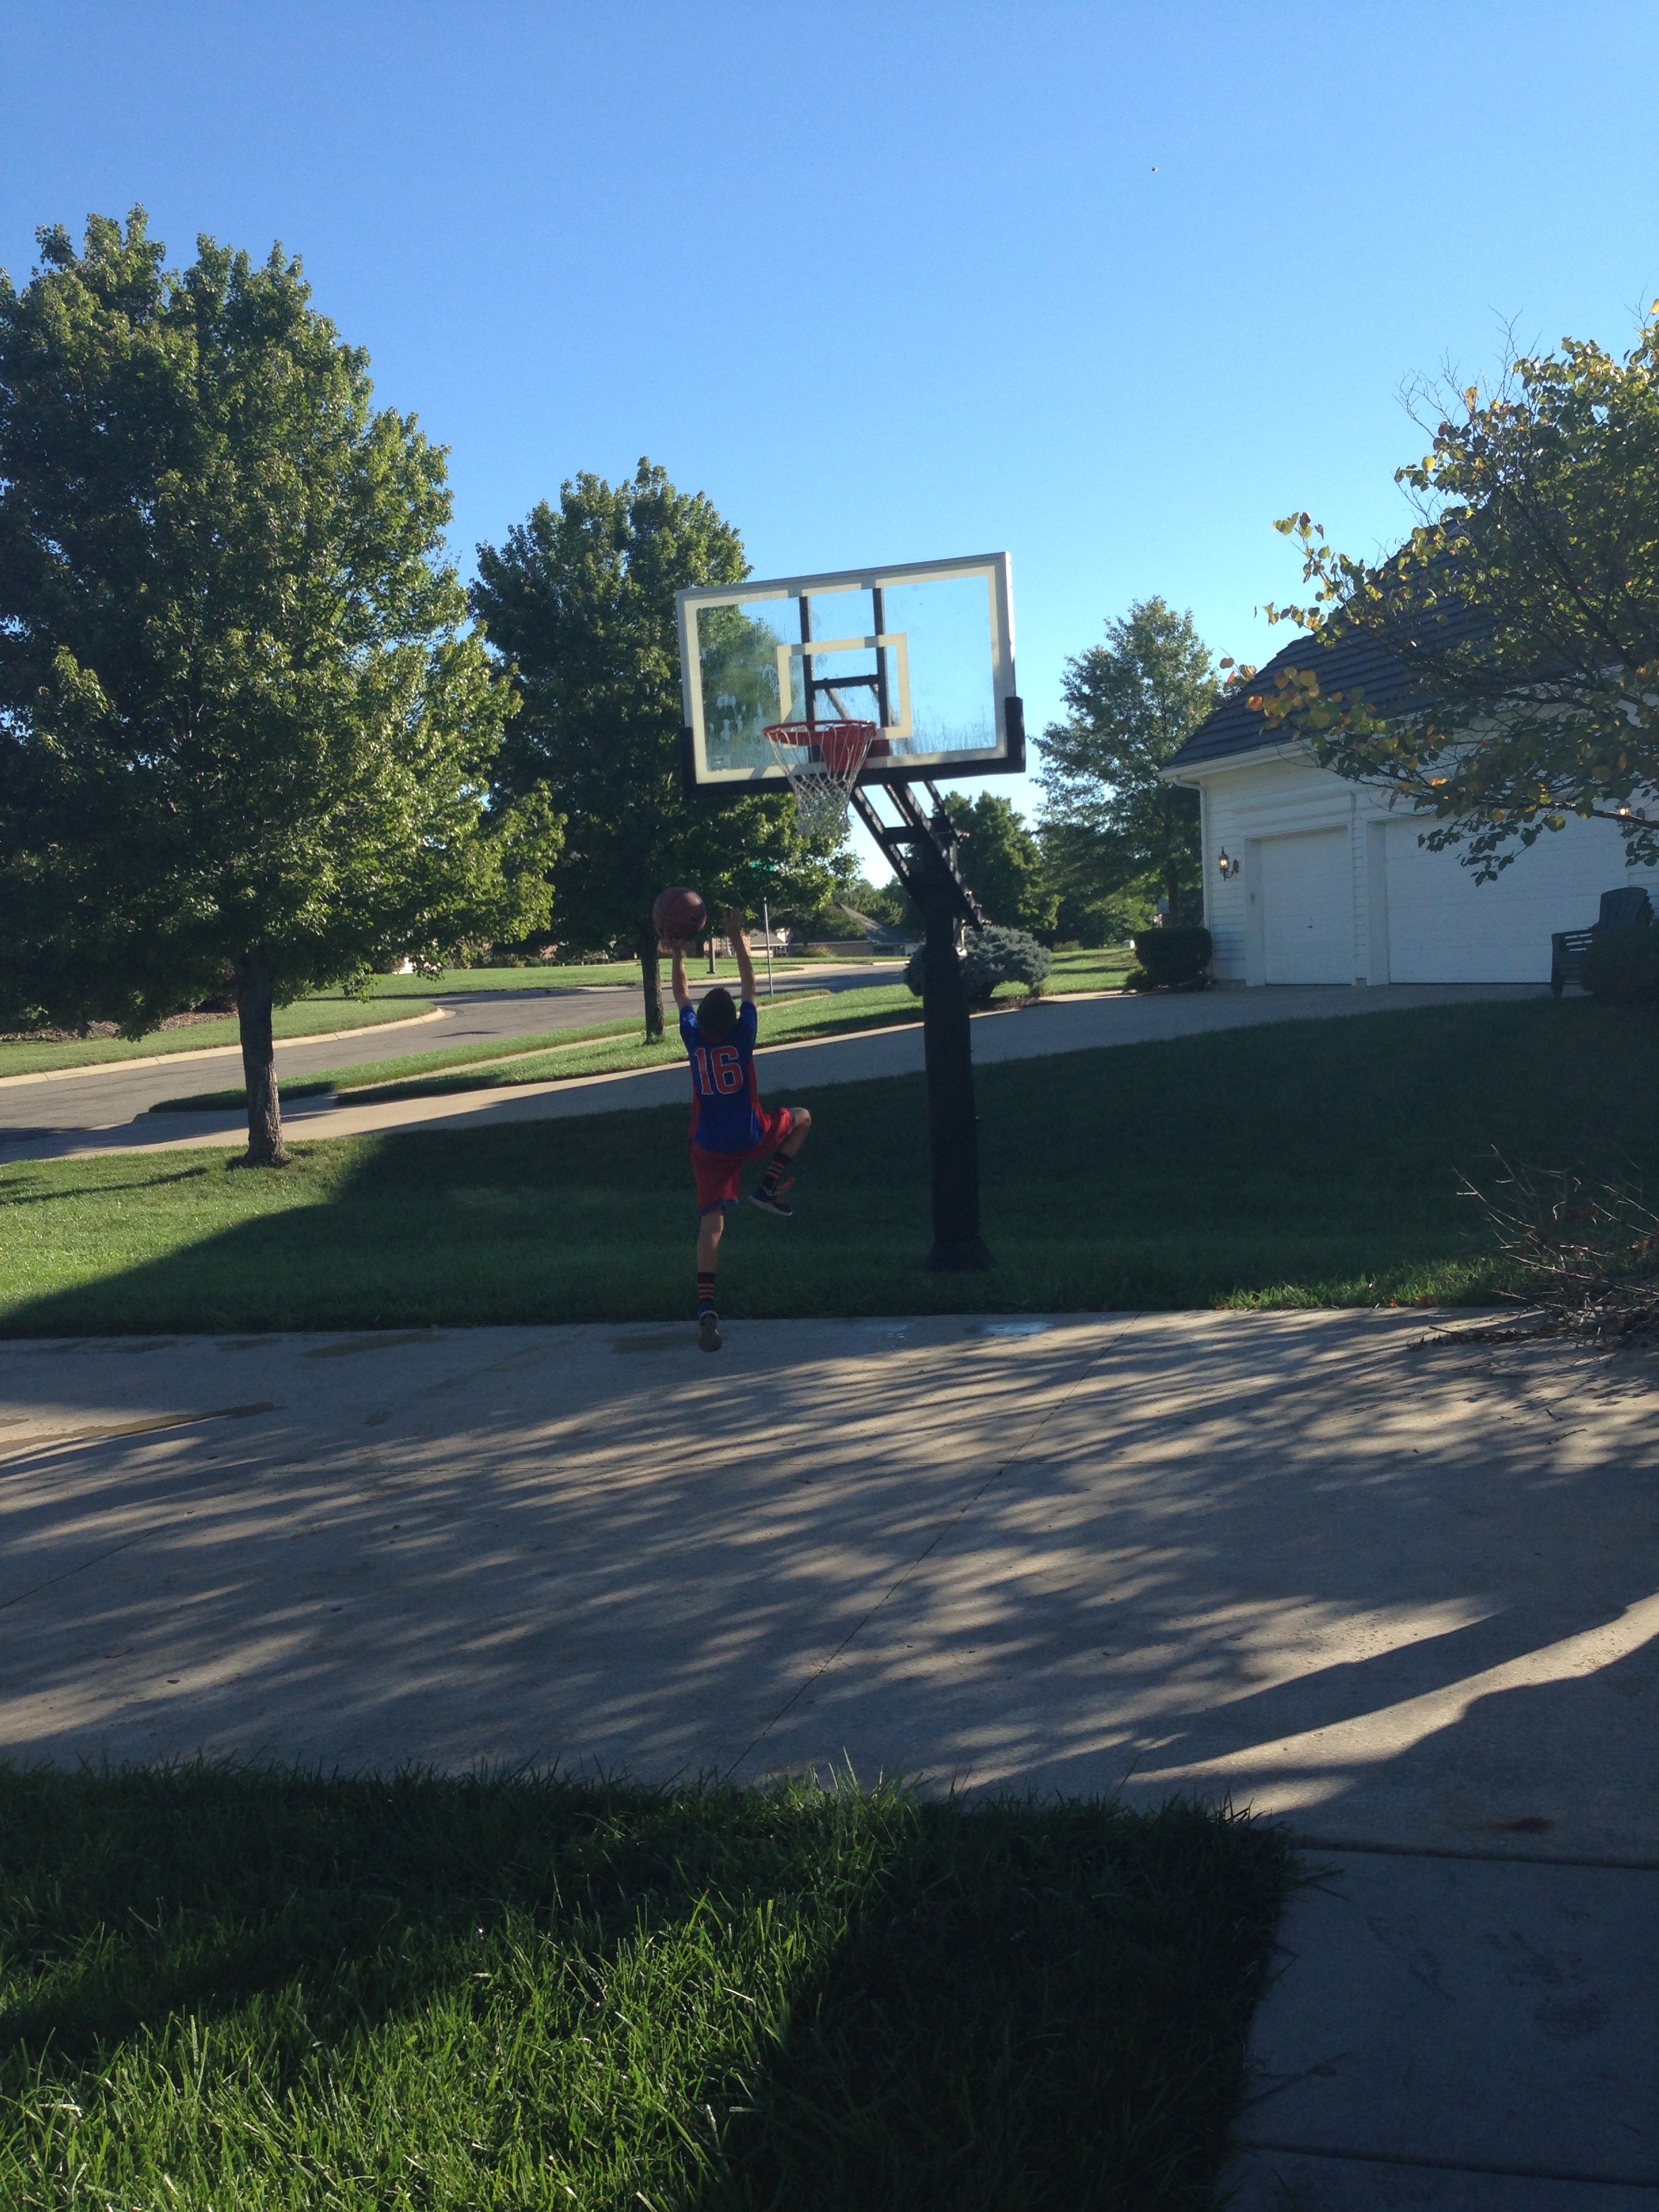 This front view shot shows the Pro Dunk Gold Basketball system adjusted to full height.